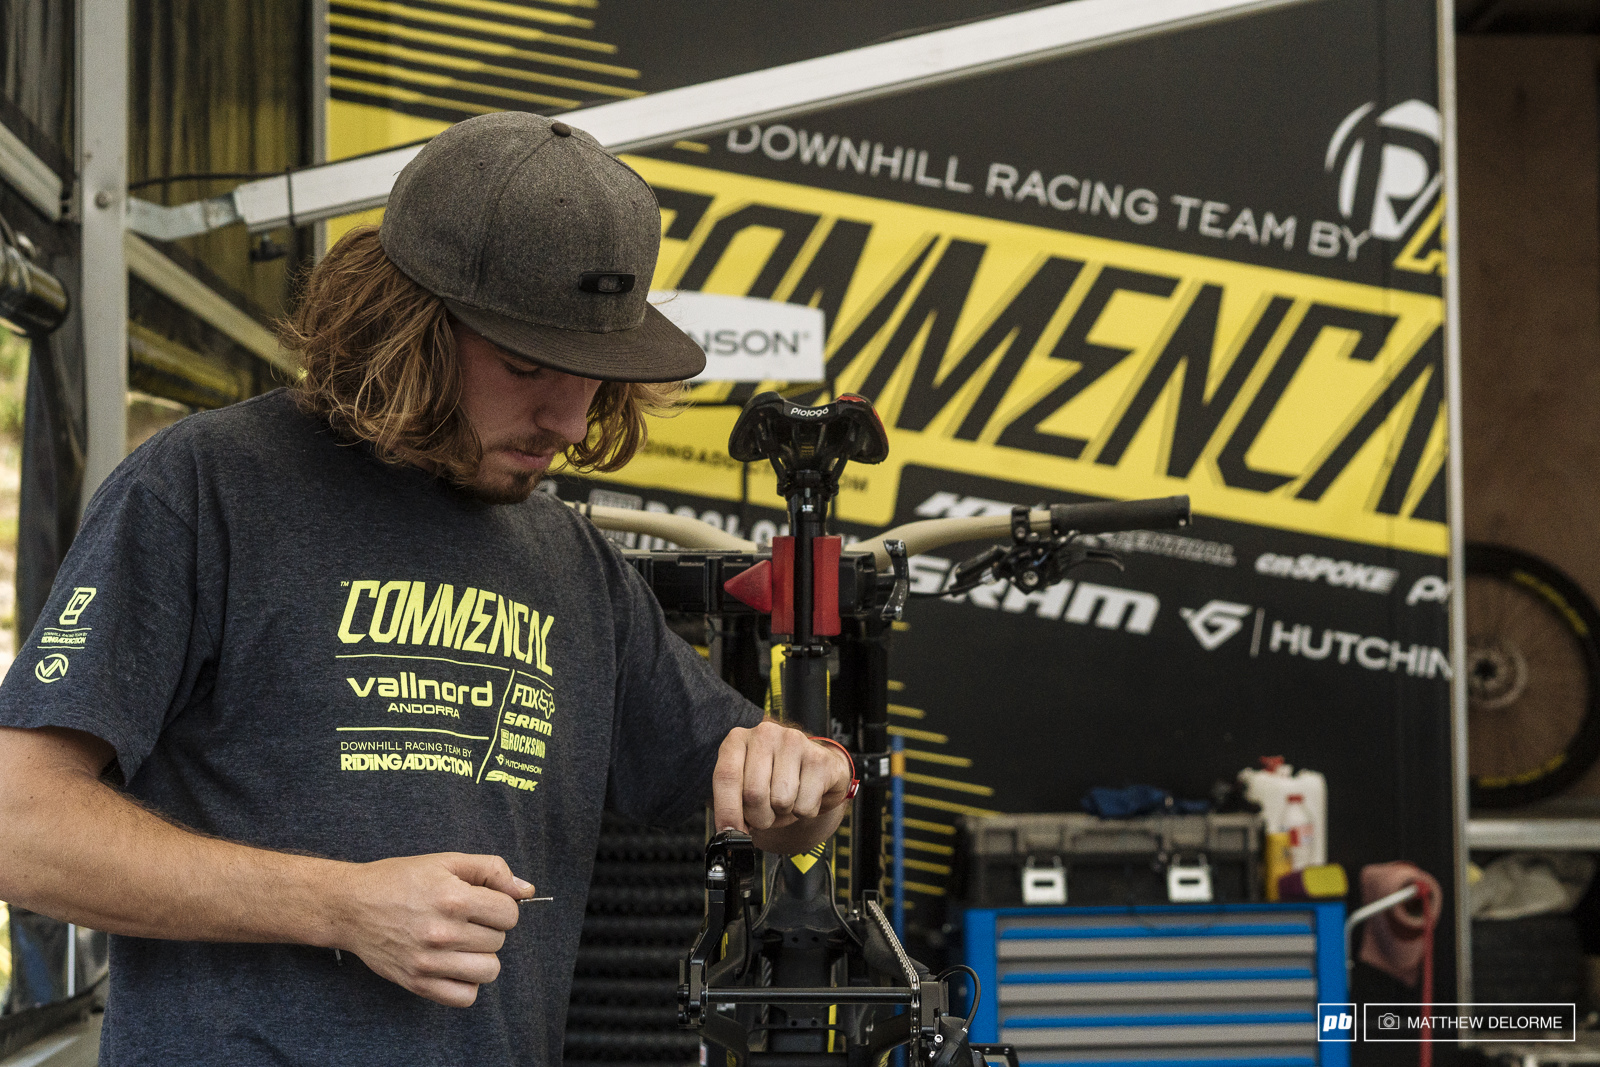 Commencal rigs getting a little love post race.